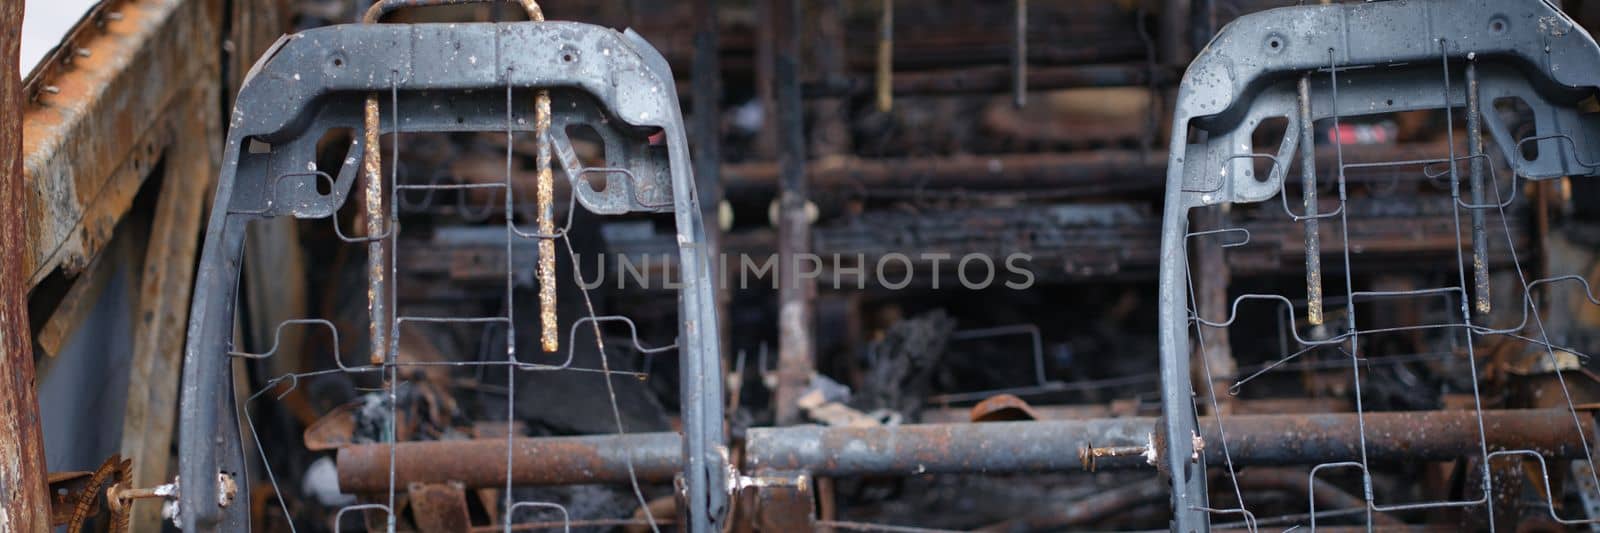 Burnt rusty car after fire or accident. Abandoned old burnt car concept